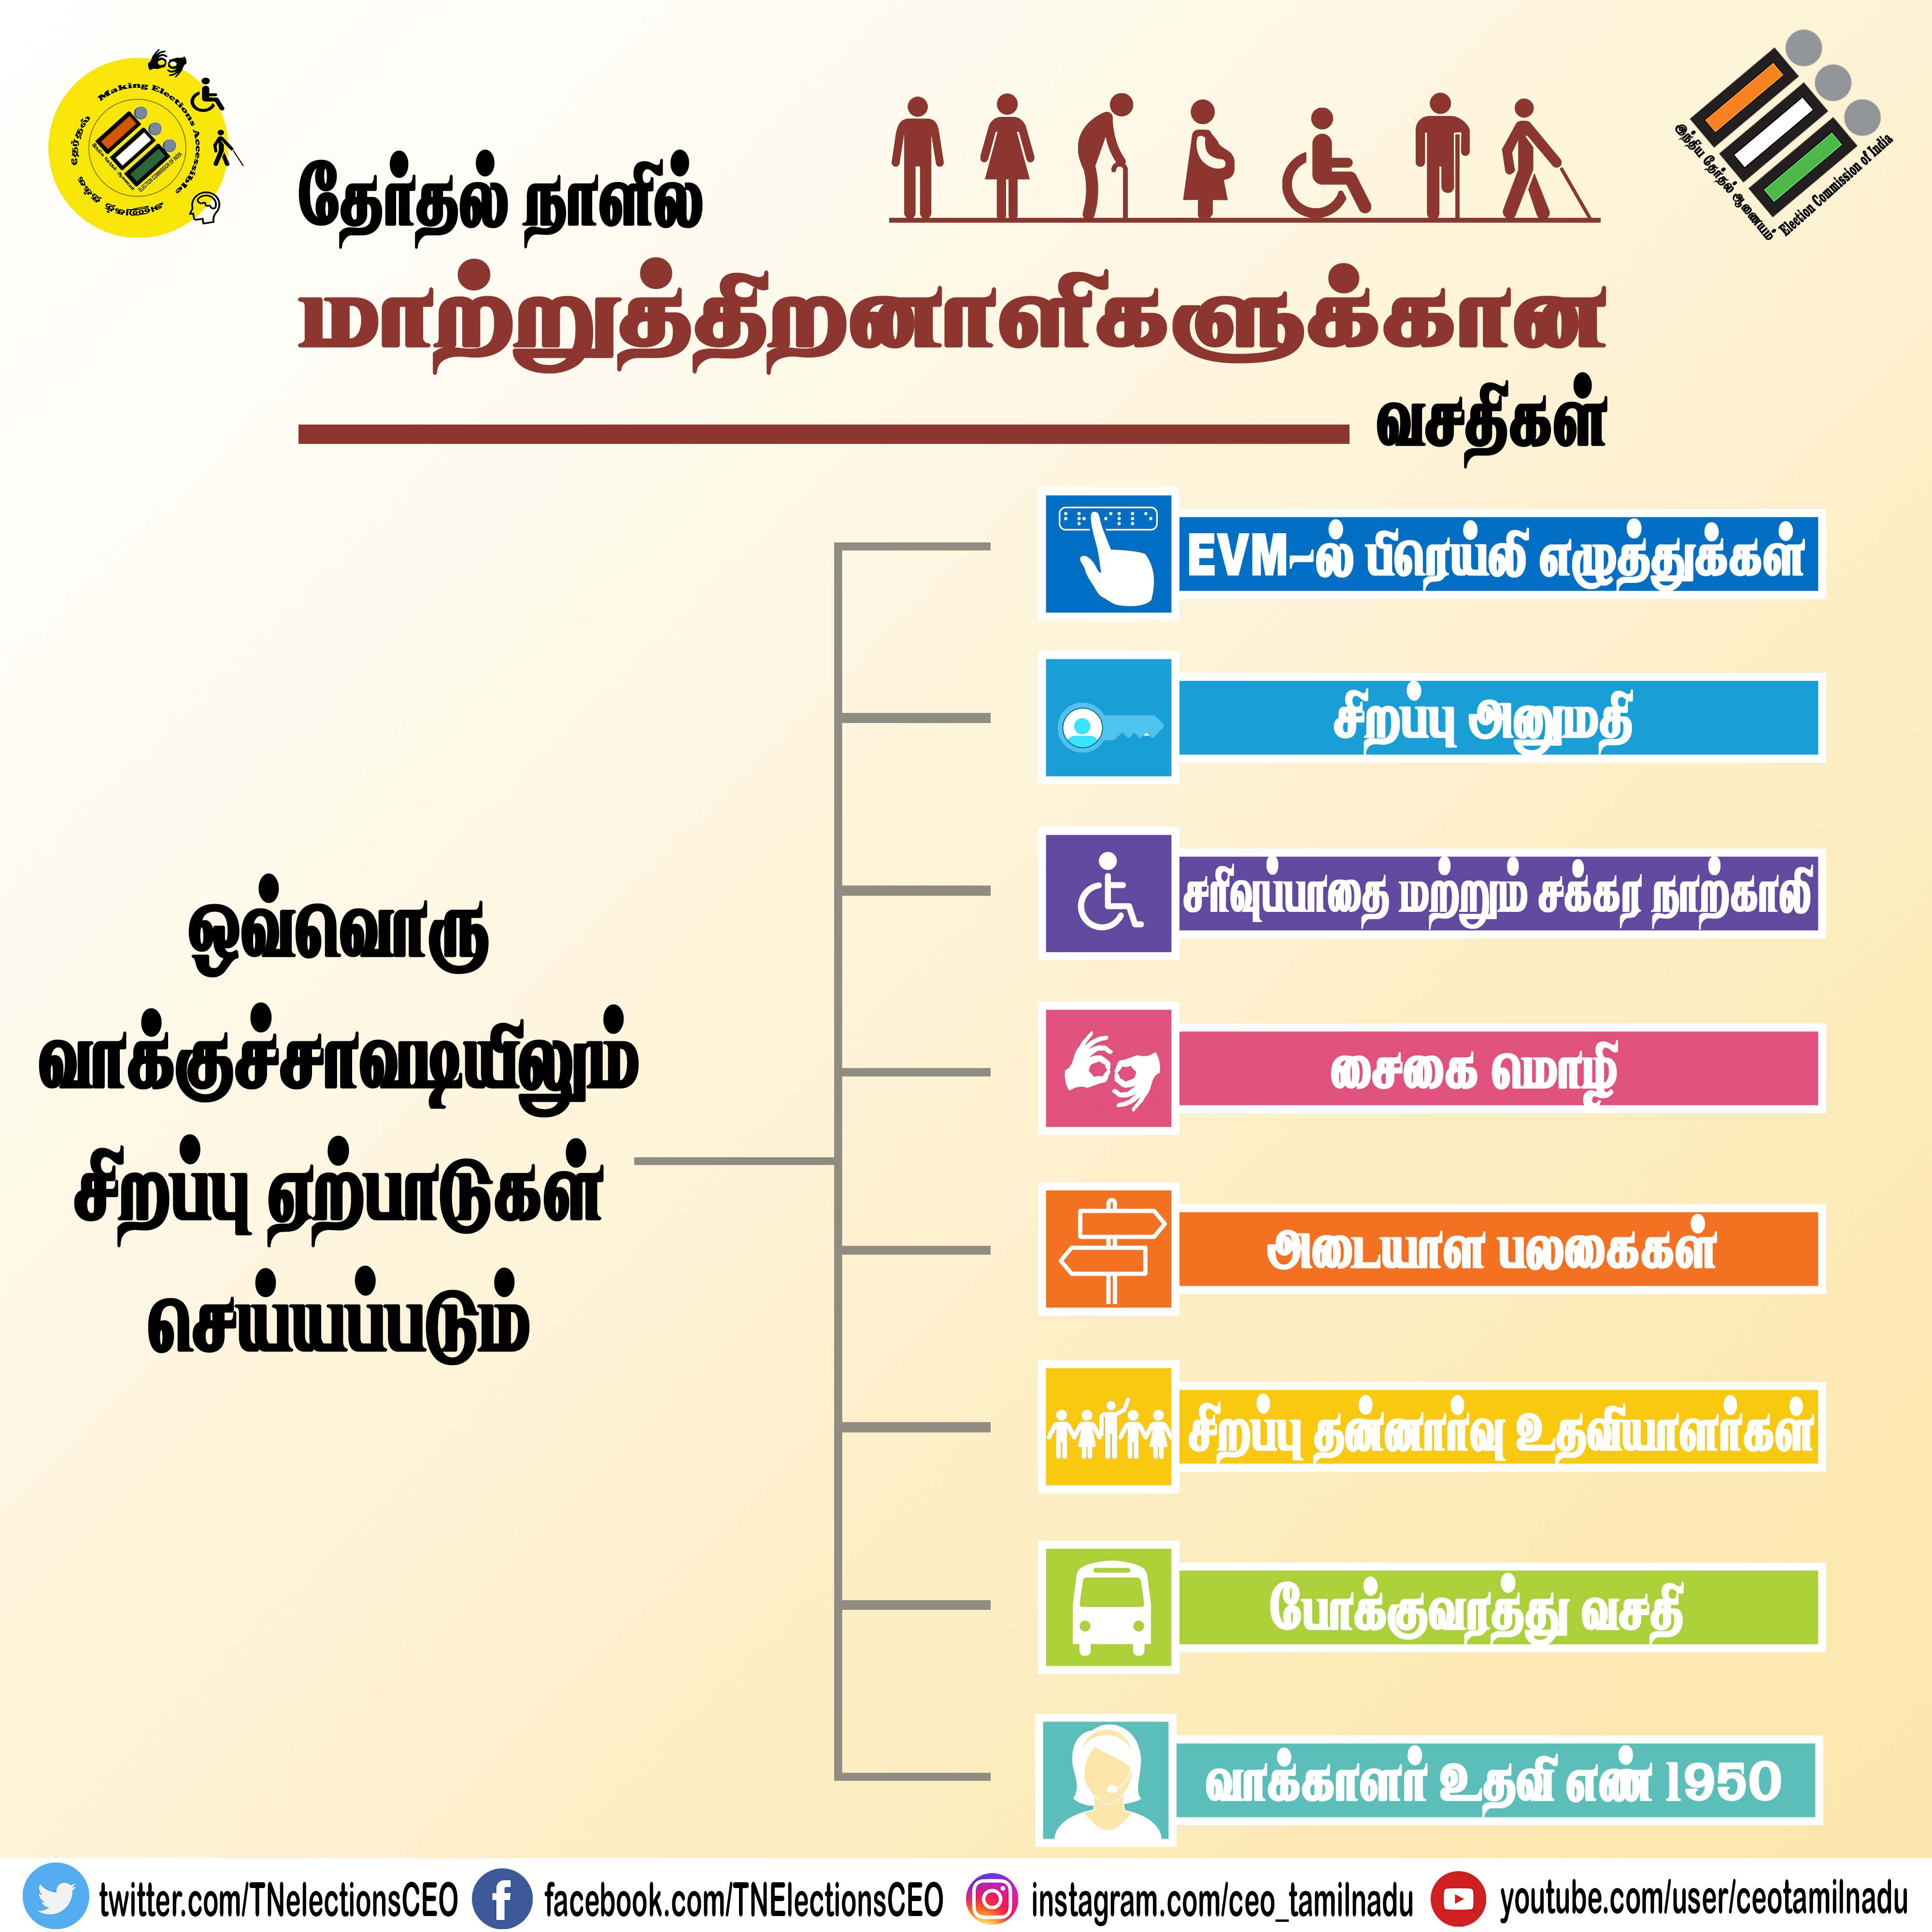 SVEEP_POSTERS_2020/Facilities for Persons with Disabilities Poster.jpg